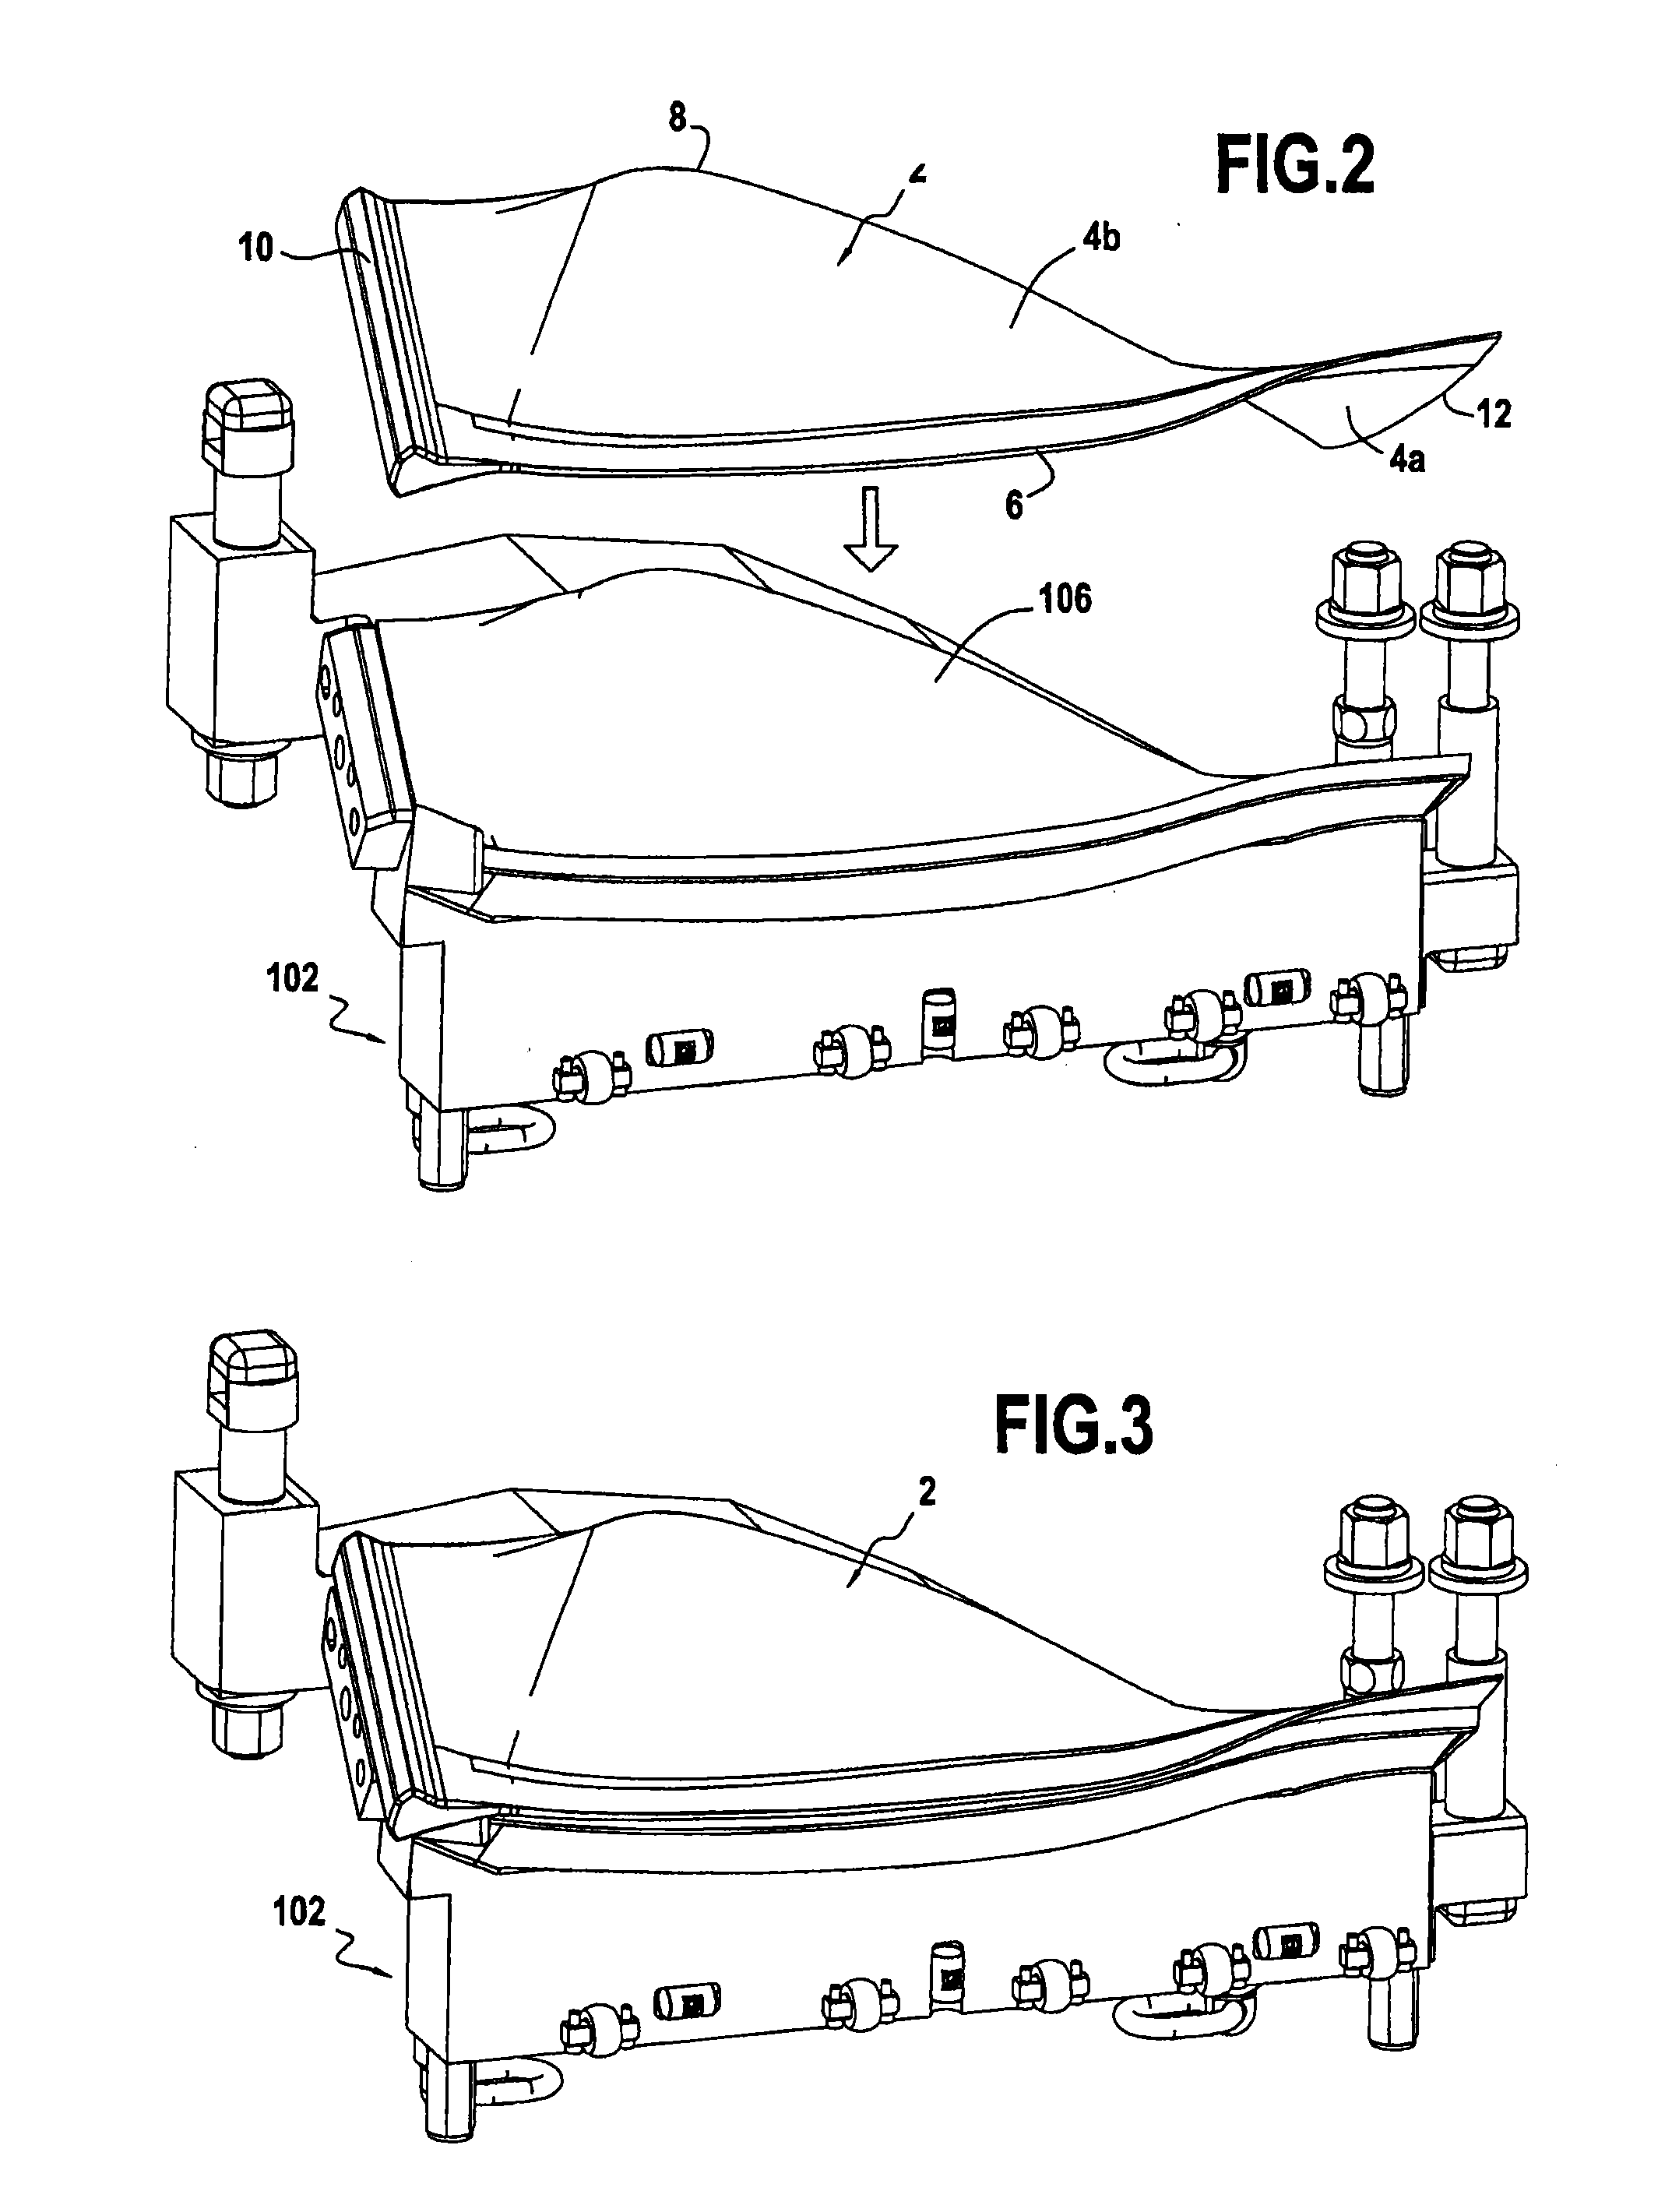 Tooling for fastening metal reinforcement on the leading edge of a turbine engine blade, and a method using such tooling